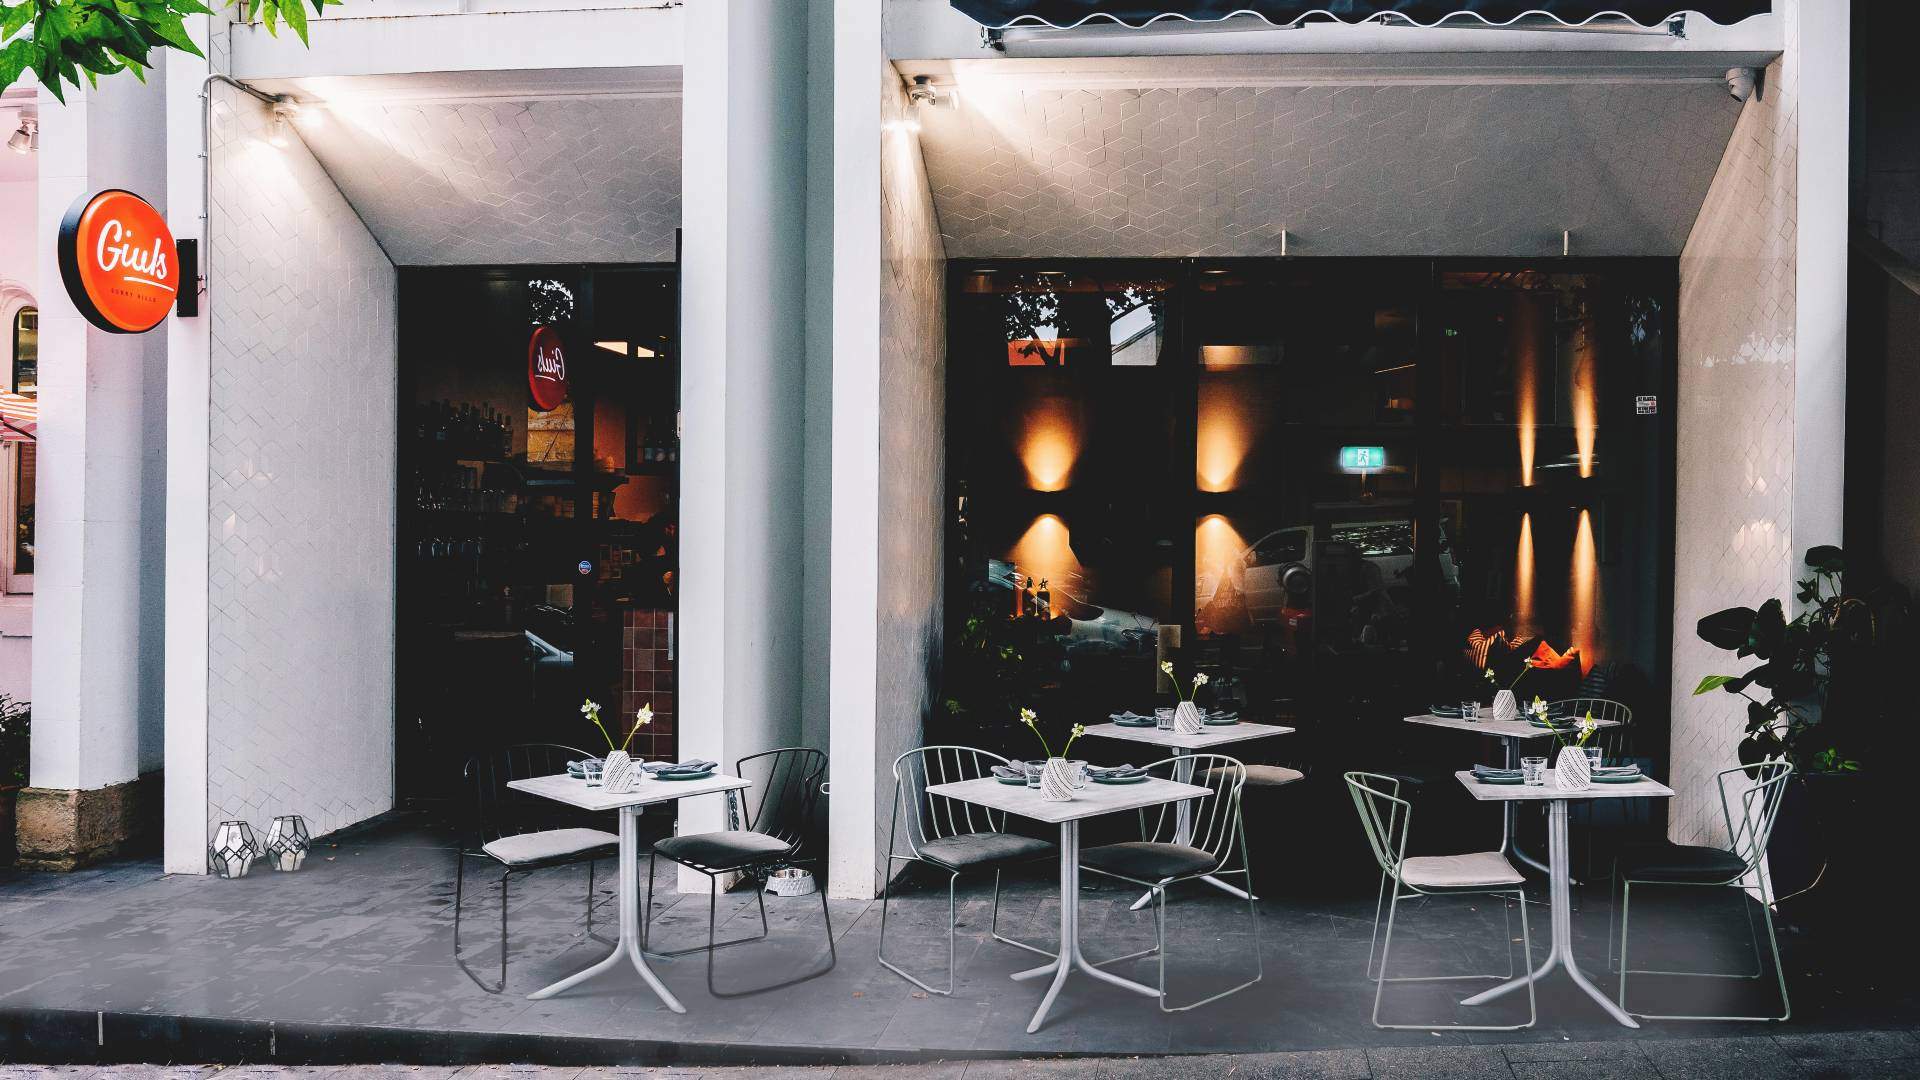 Giuls Is the Newest Italian Restaurant in Surry Hills Boasting Tuscan Cuisine and Al Fresco Dining